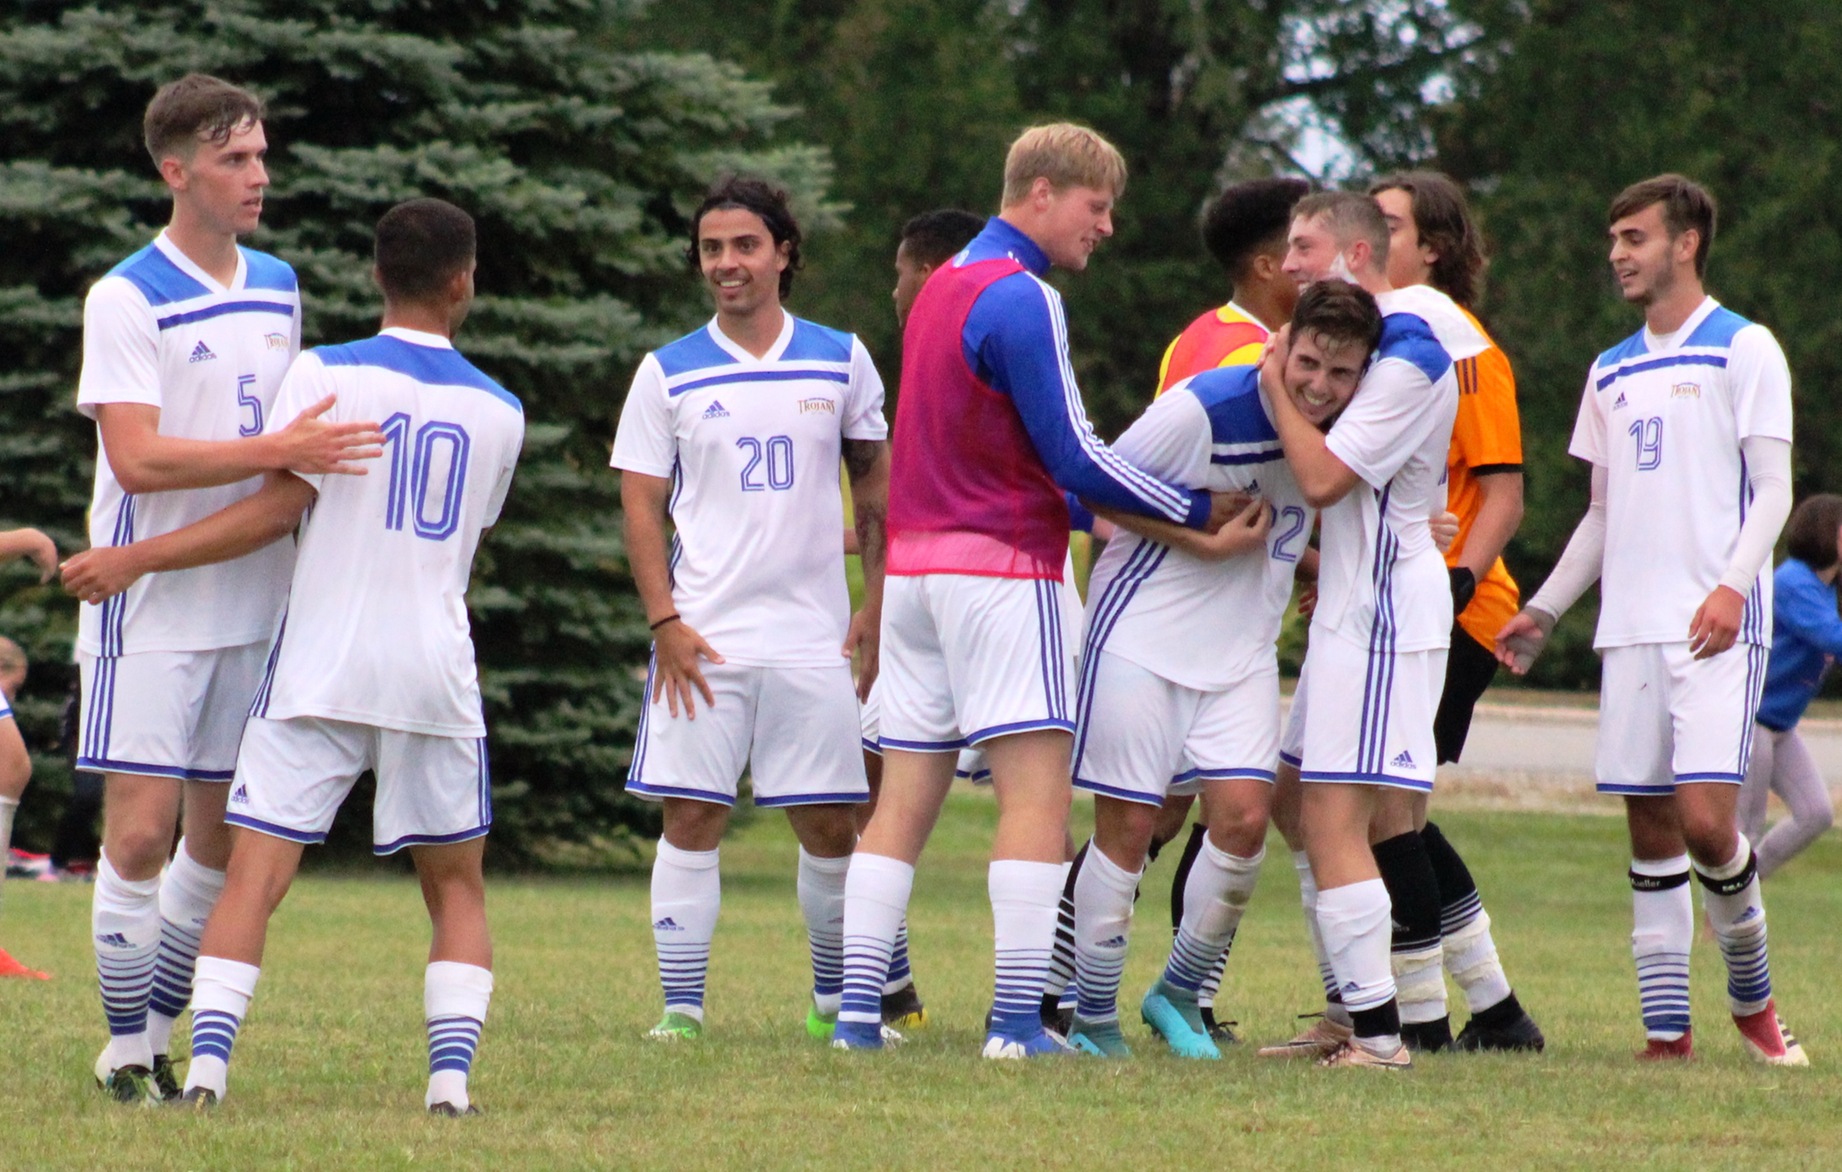 NIACC players celebrate after a hard-fought 2-1 win over Hawkeye CC on Saturday.